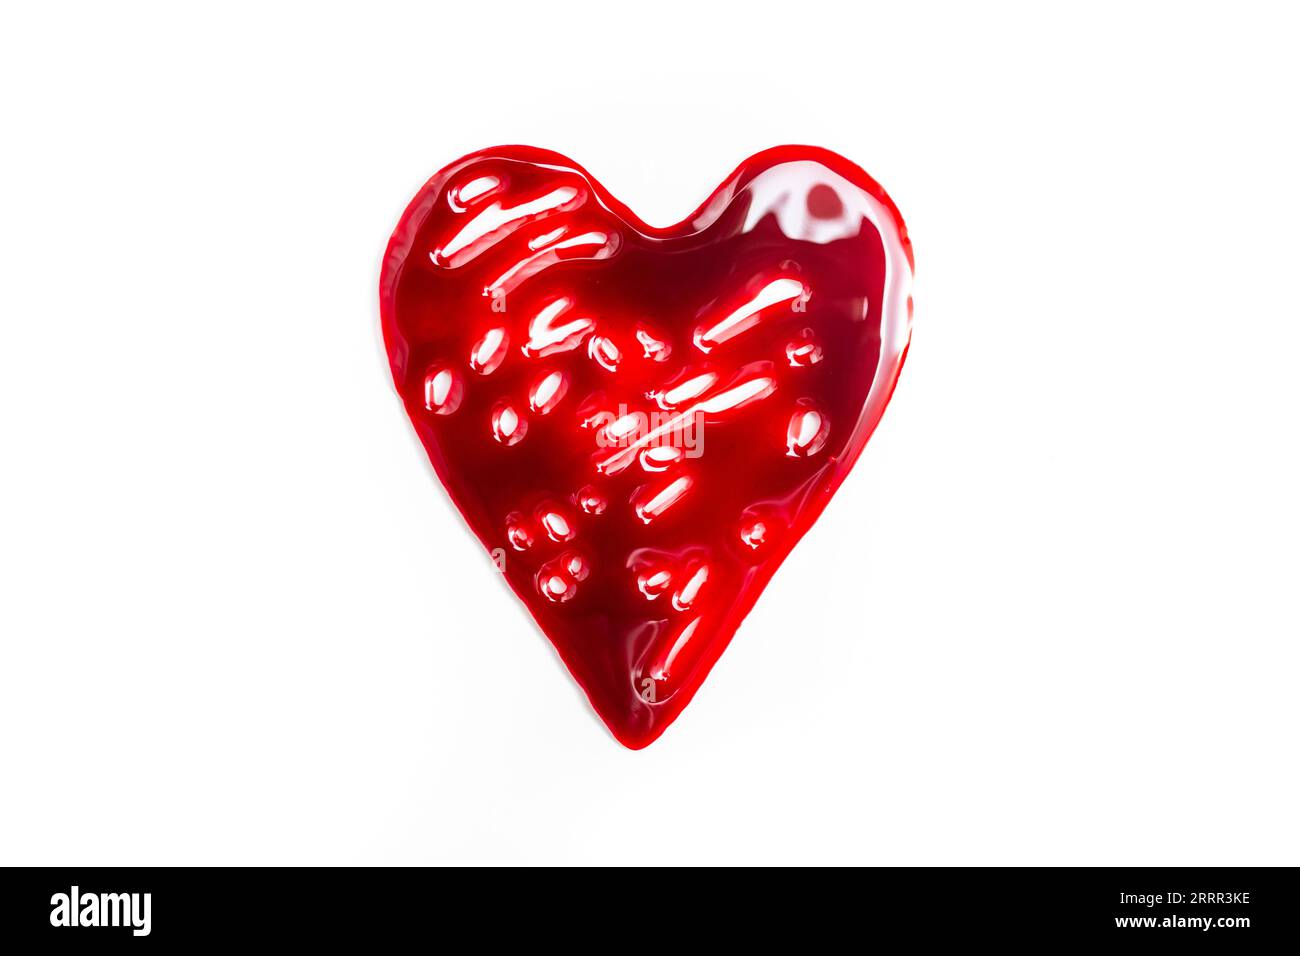 Heart shape made with red blood on white background Stock Photo